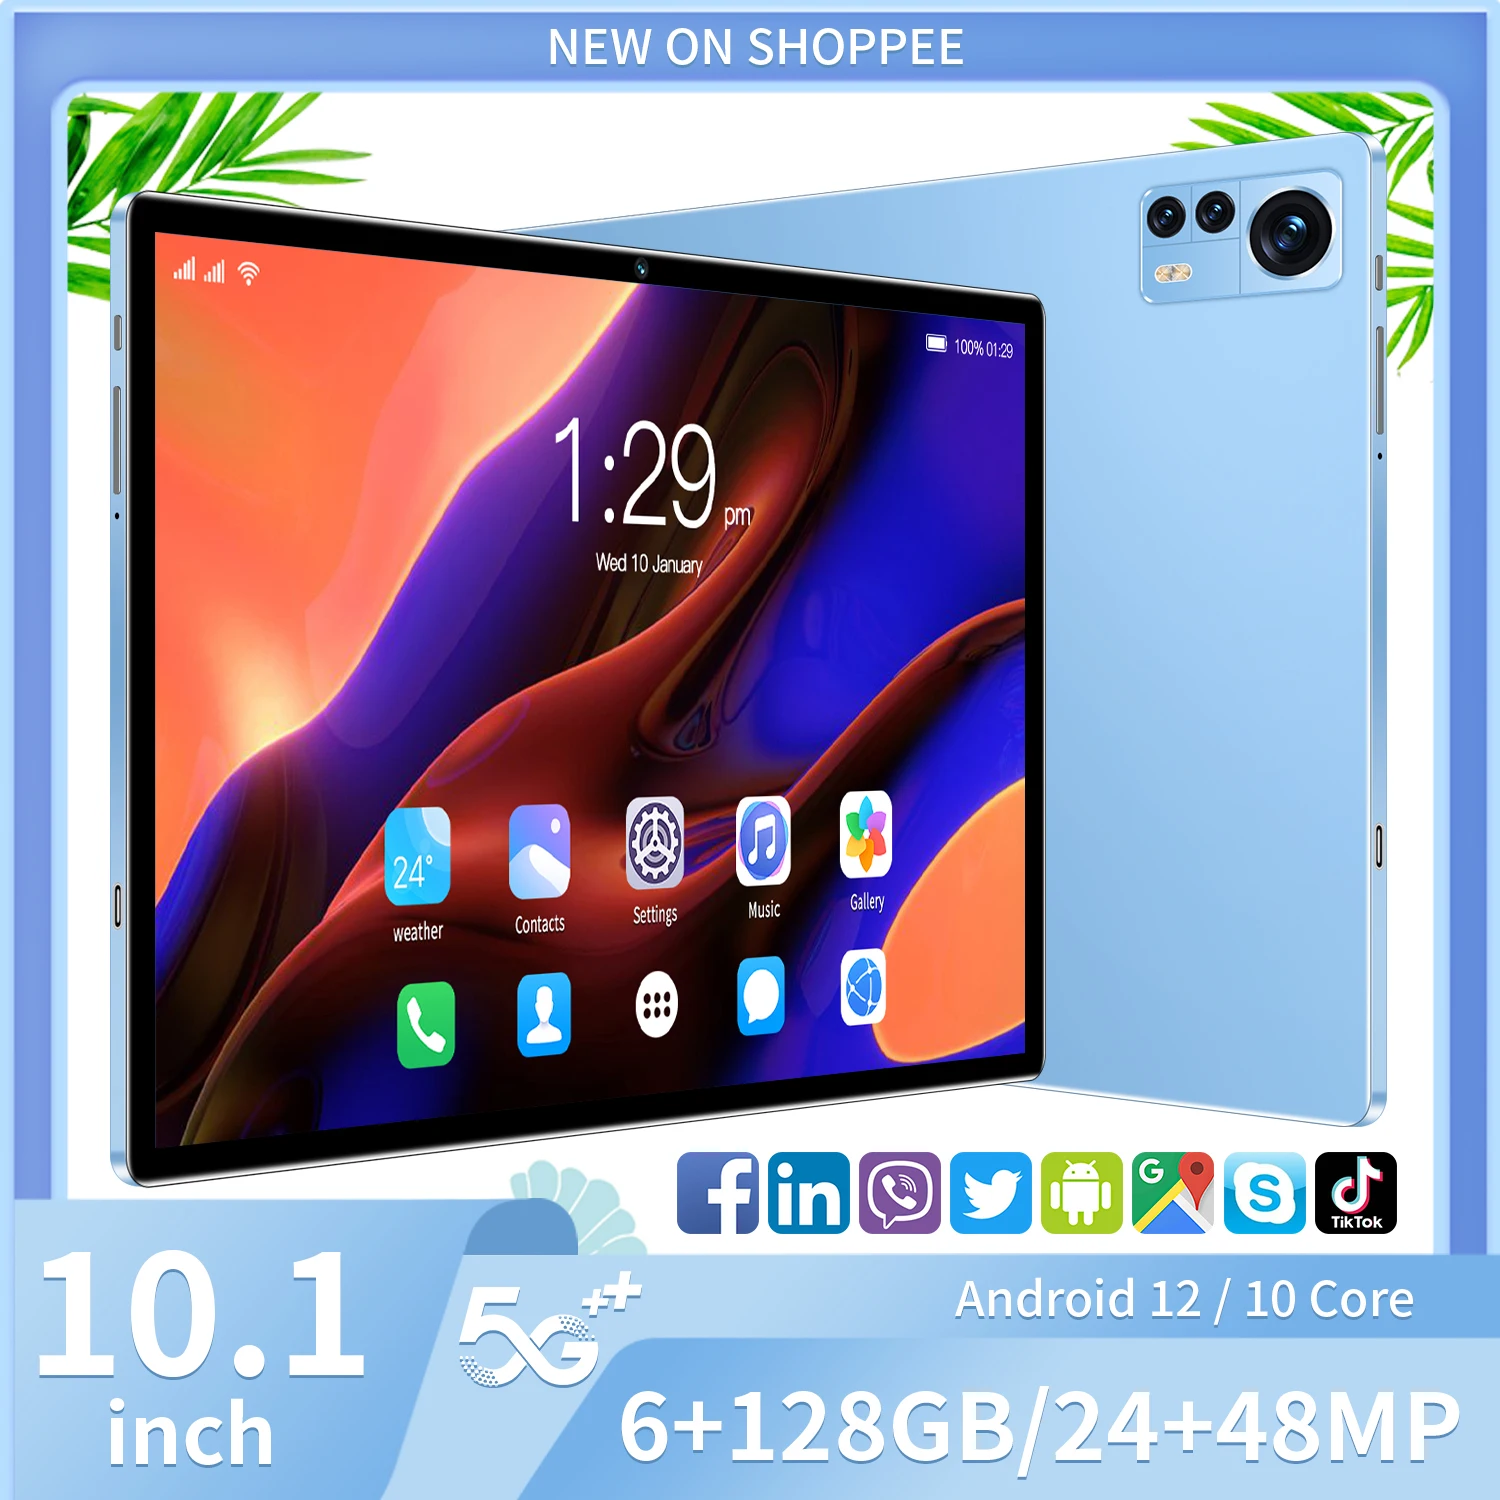 New 10.1-inch 5G tablet Android 10.0 eight core mobile phone calls Google Play 6GB RAM 128GB ROM tablet PC WiFi Bluetooth Type-C